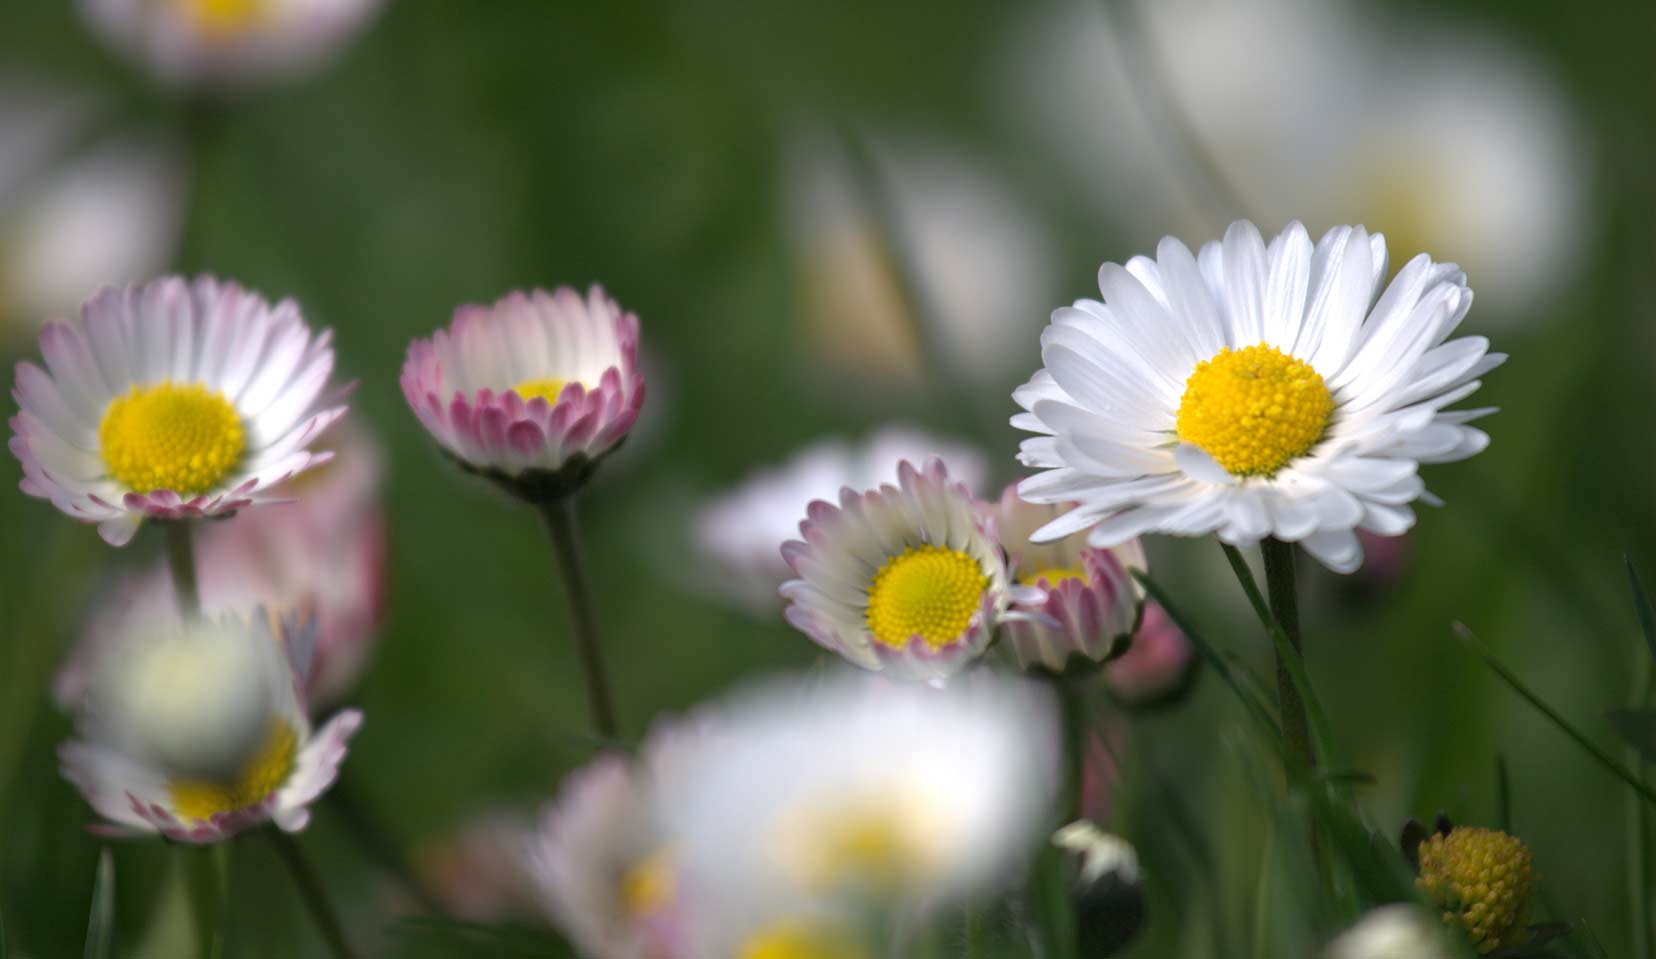 Daisy Bellis Perennis L Daisy Family Asteraceae Dr Hauschka Cosmetics Nature S Treasures Transformed For You